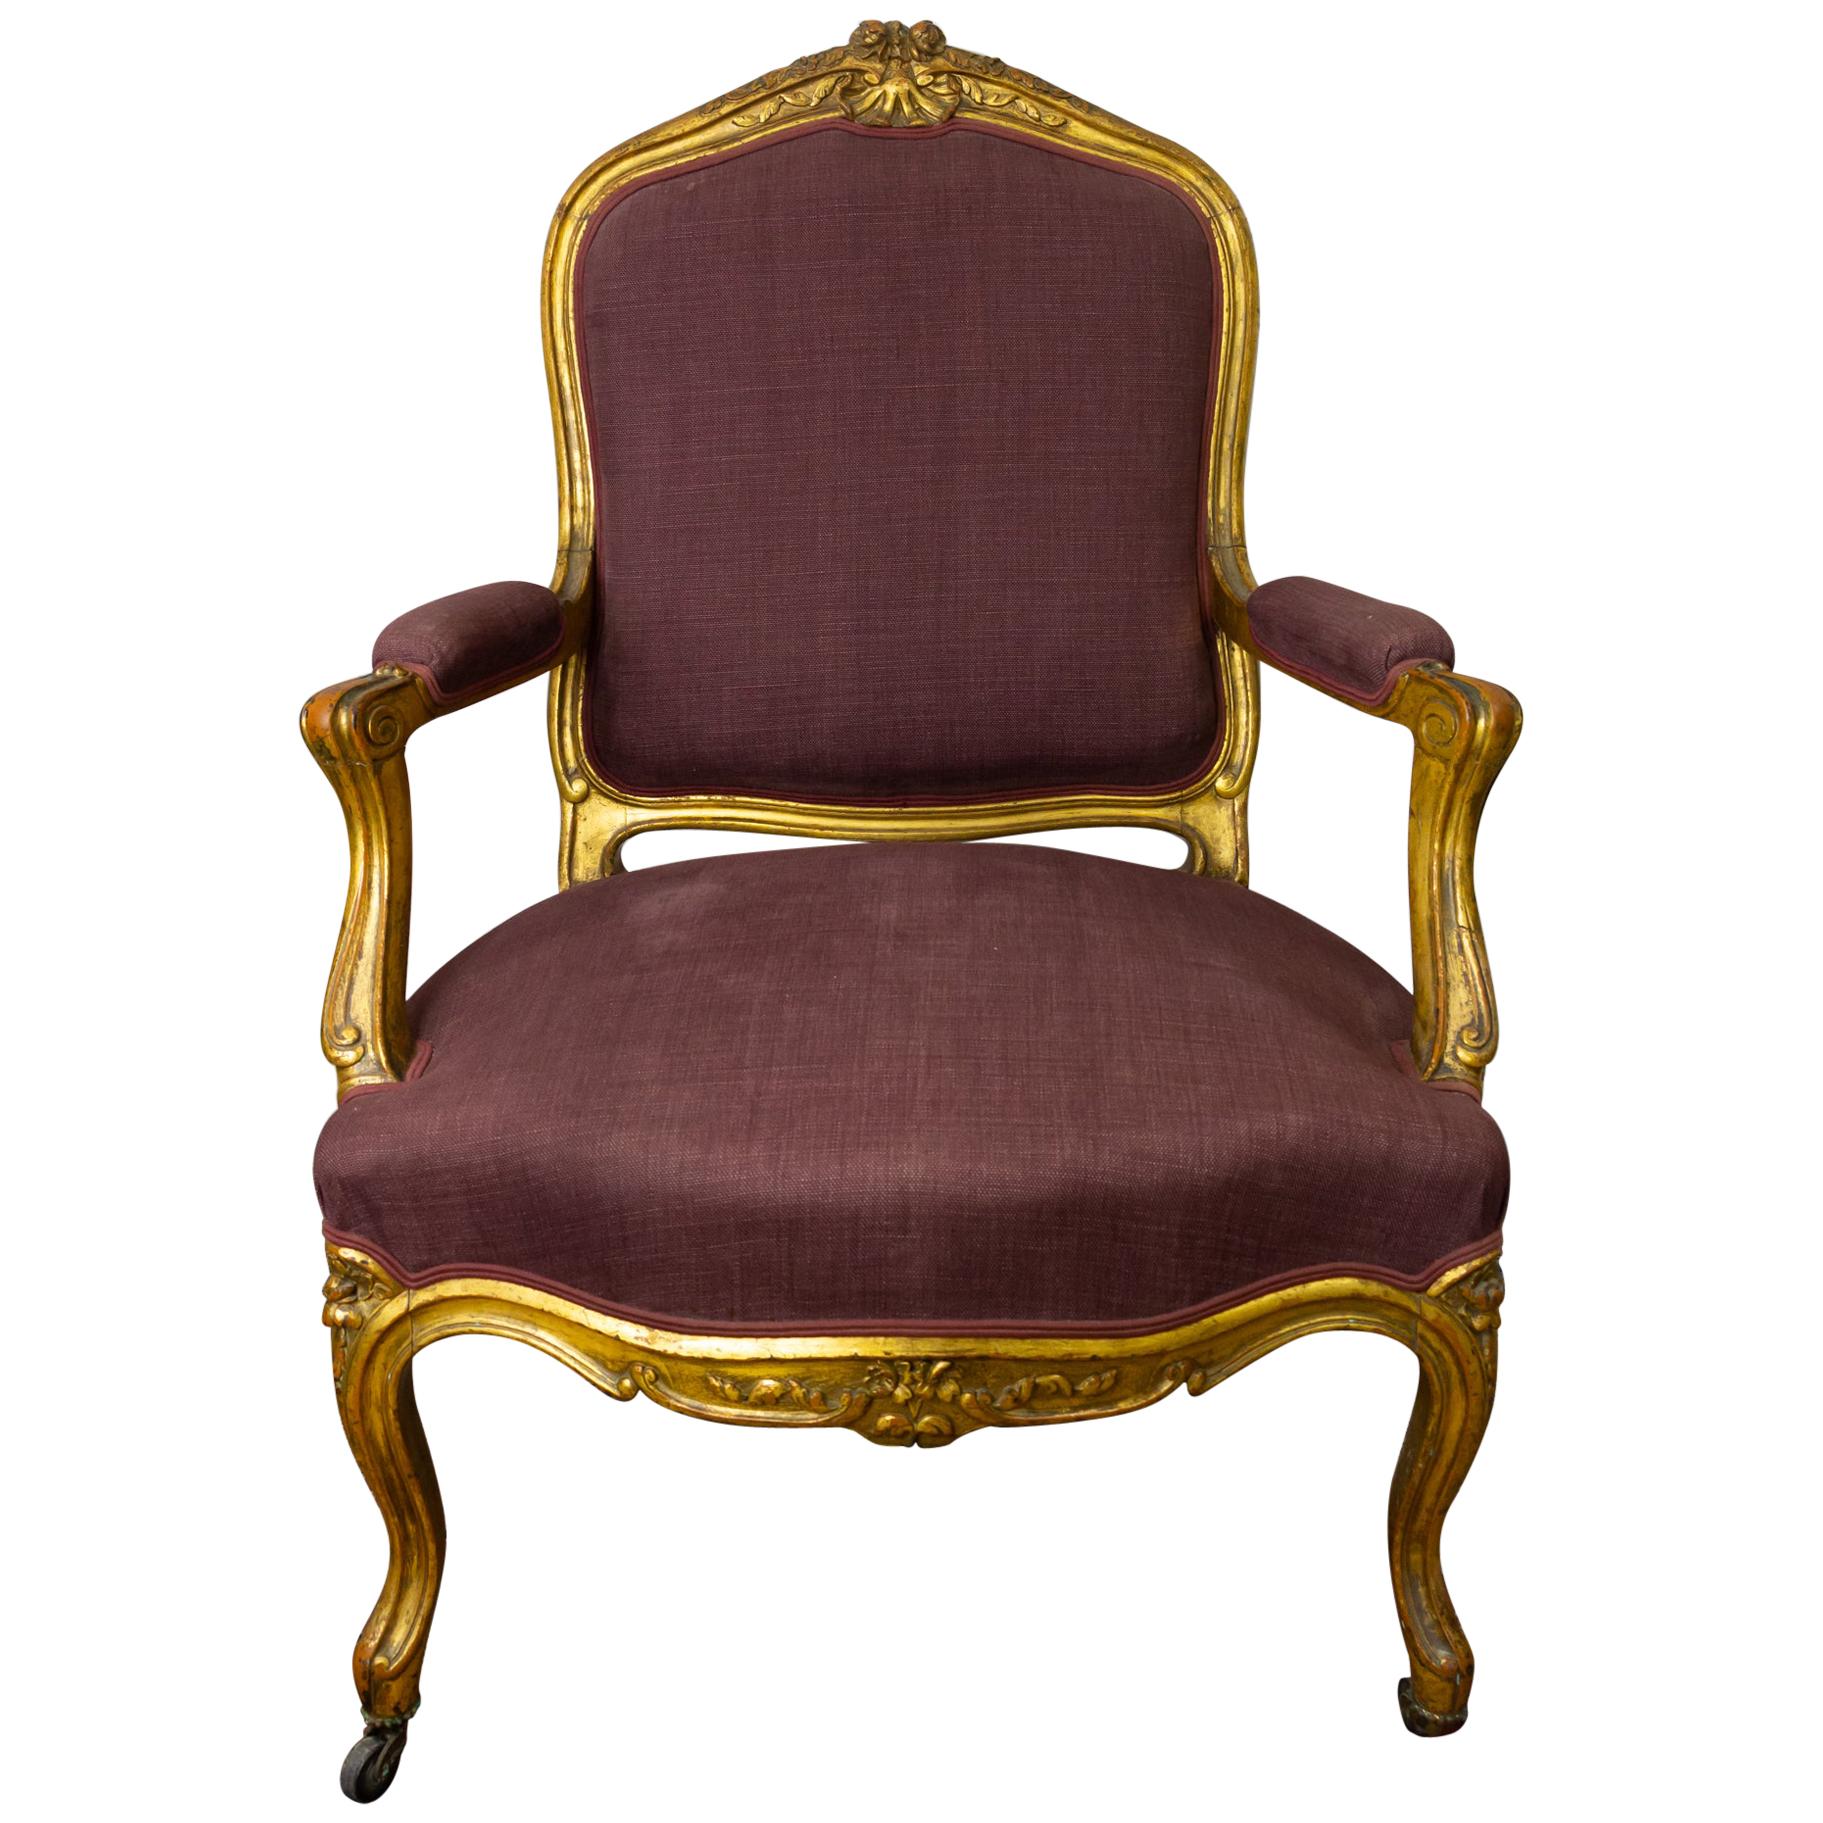 Louis XV Cabriolet Armchair "A la Reine" in Gilded Wood